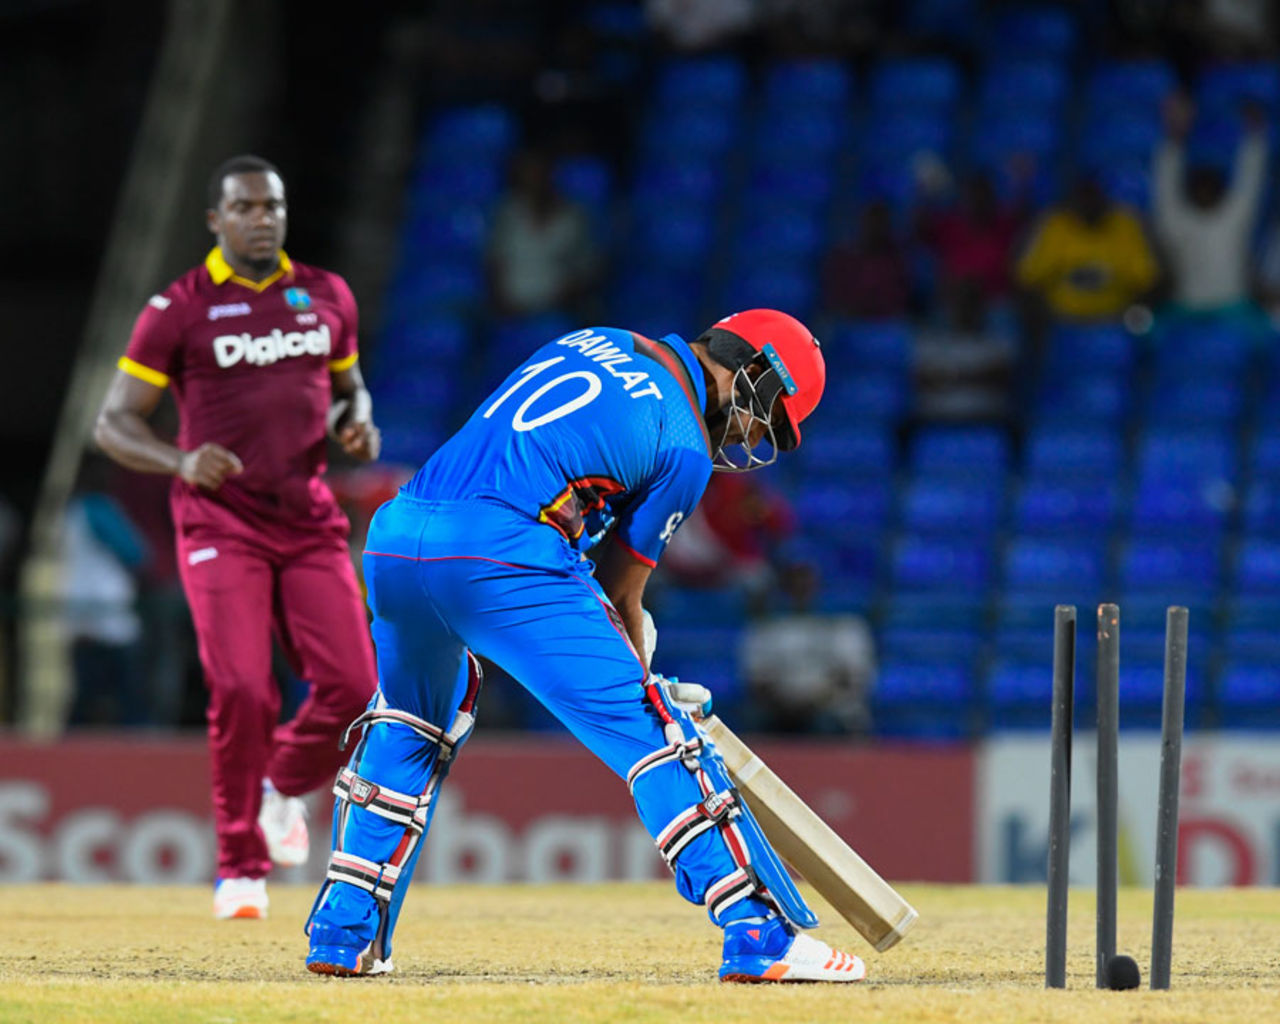 Dawlat Zadran brings the bat down too late against Jerome Taylor's yorker, West Indies v Afghanistan, 2nd T20I, St Kitts, June 3, 2017